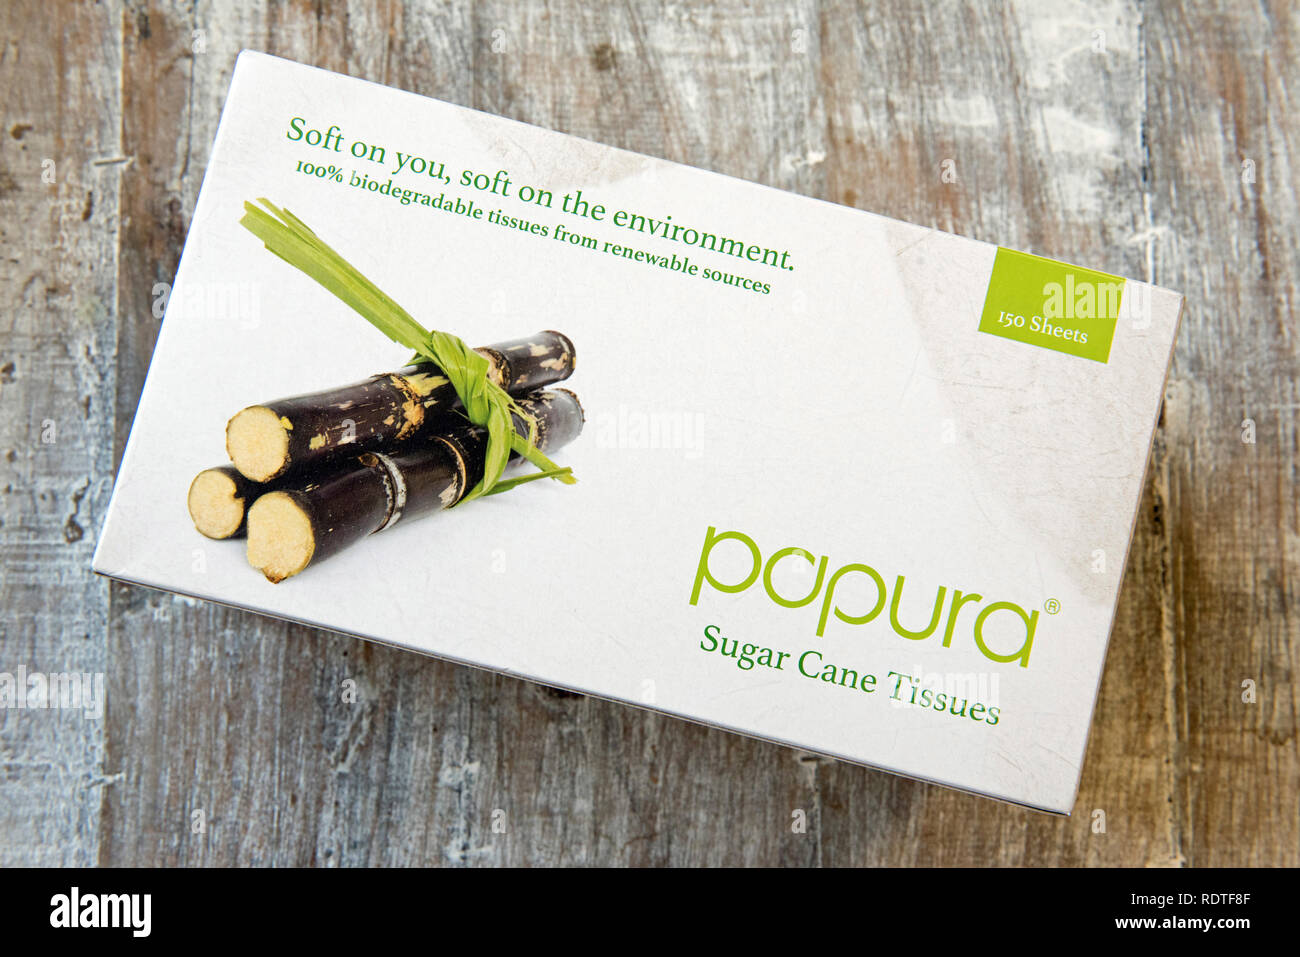 Box of papura sugar cane handkerchiefs, biodegradable tissues or hankies from a sustainable saurce, soft on the environment and zero waste. Stock Photo